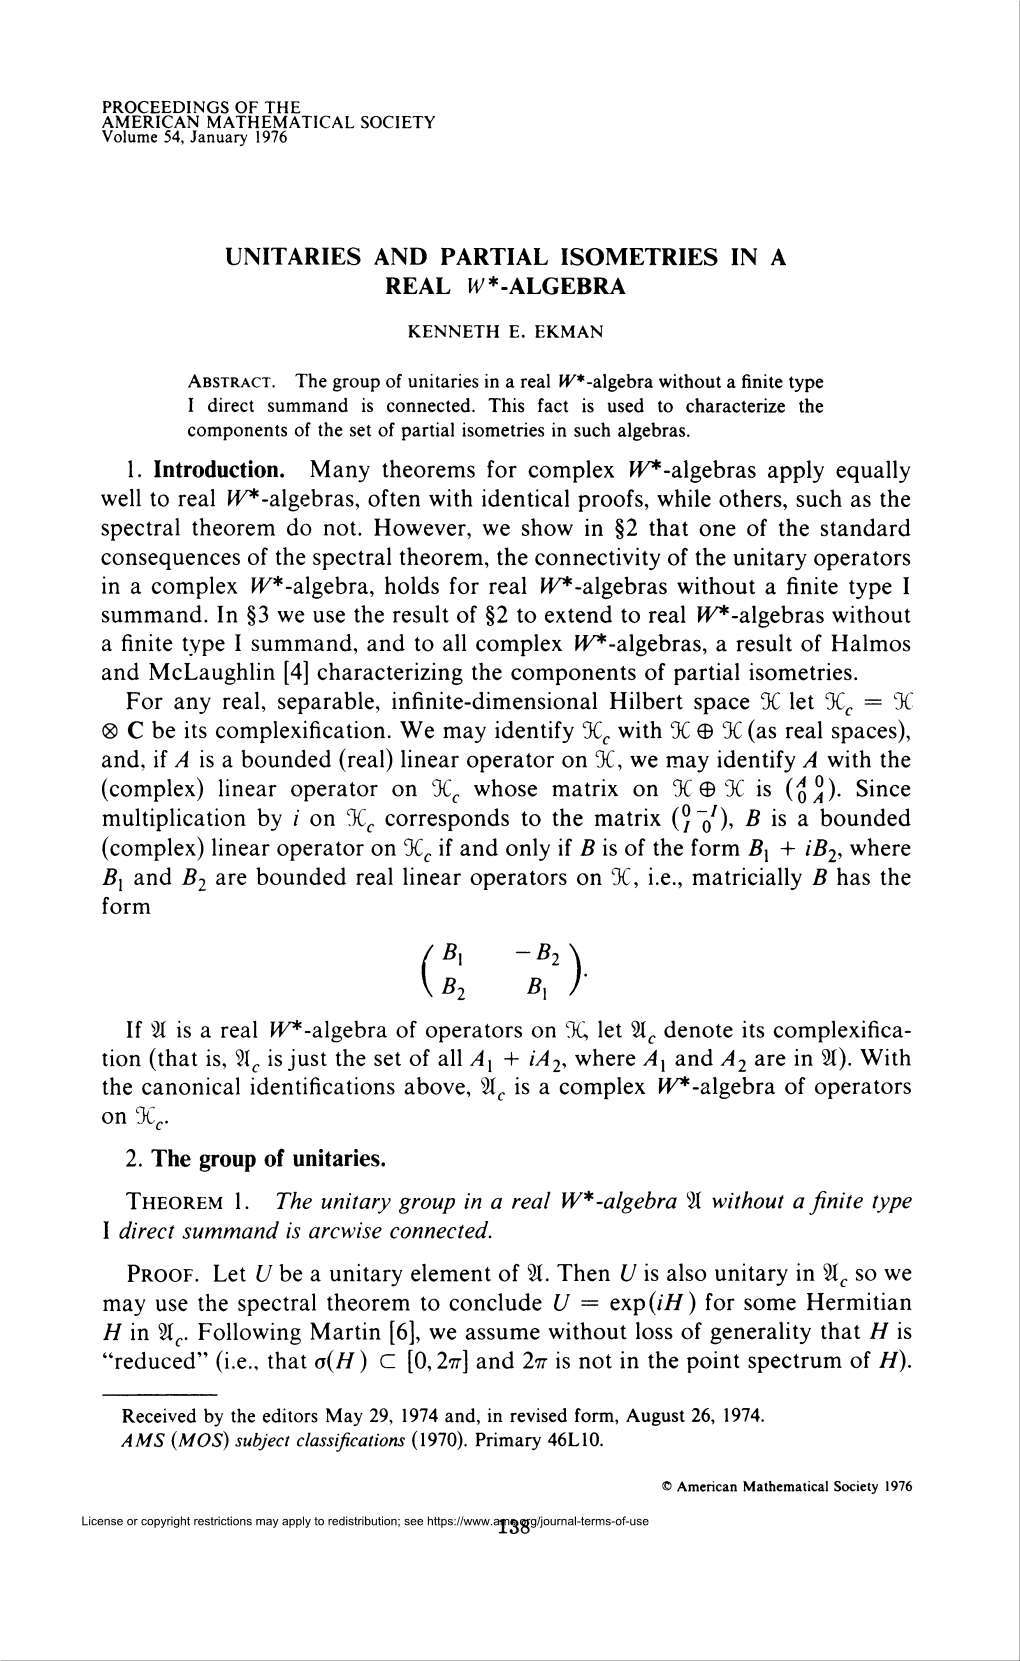 Unitaries and Partial Isometries in a Real Iv"-Algebra